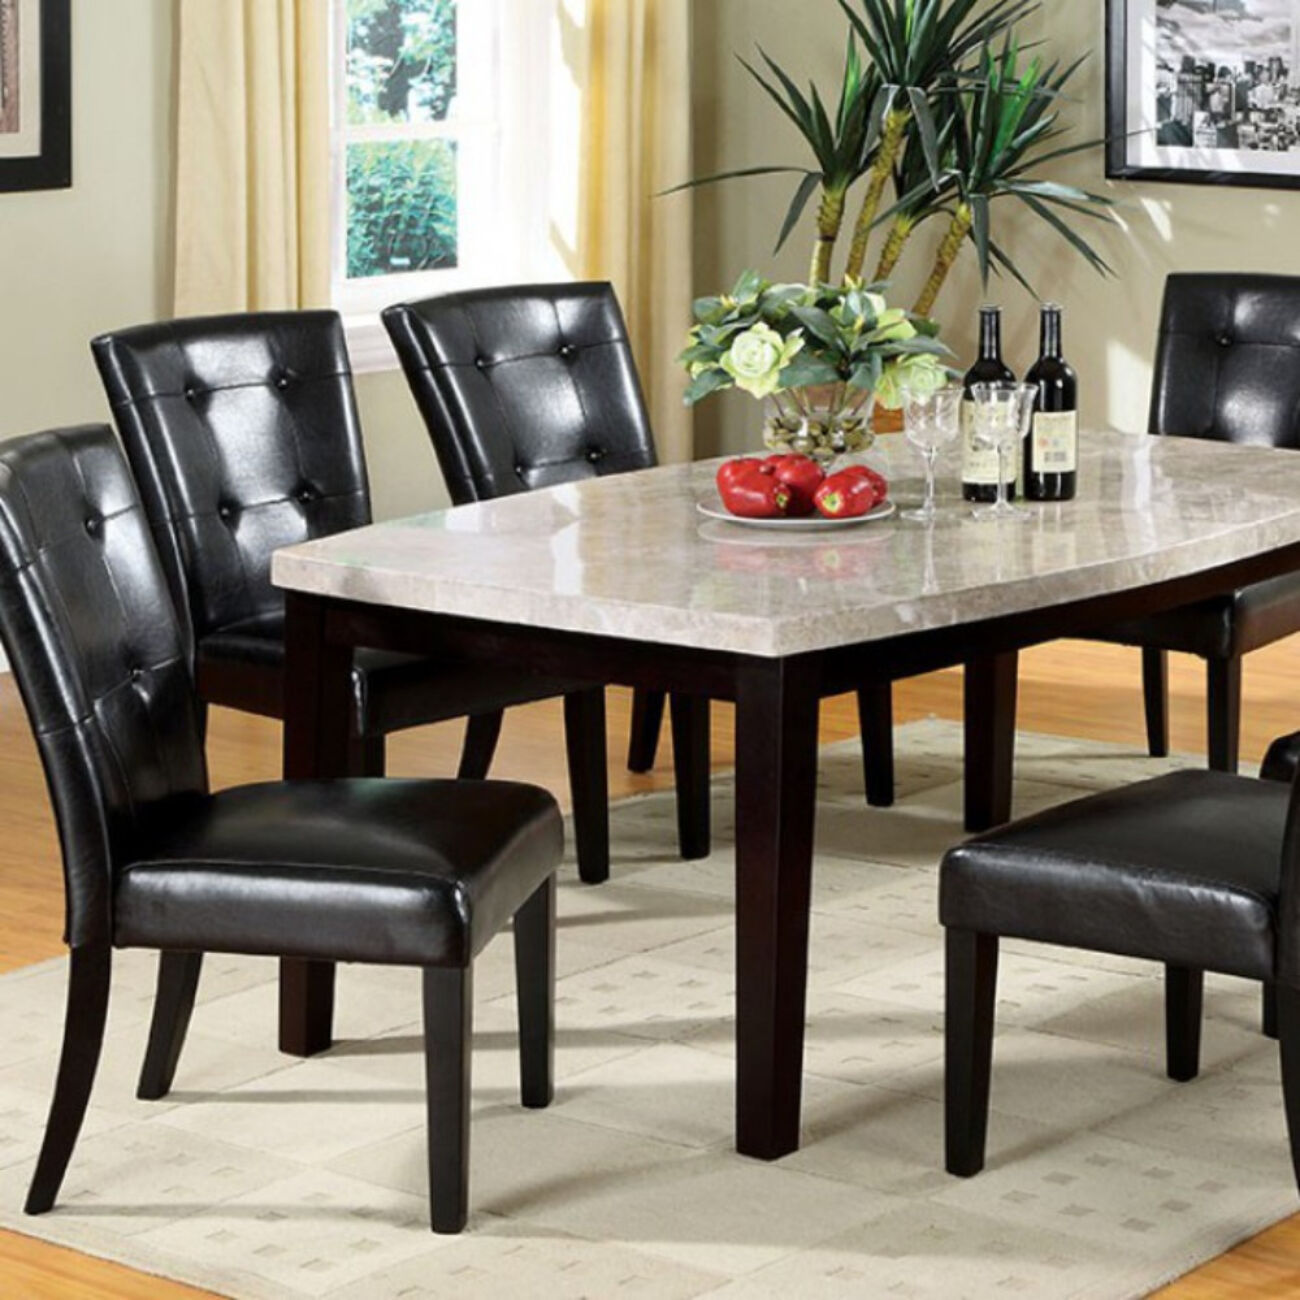 Marion I Marble Top Oval Edge Dining Table, Espresso Finish